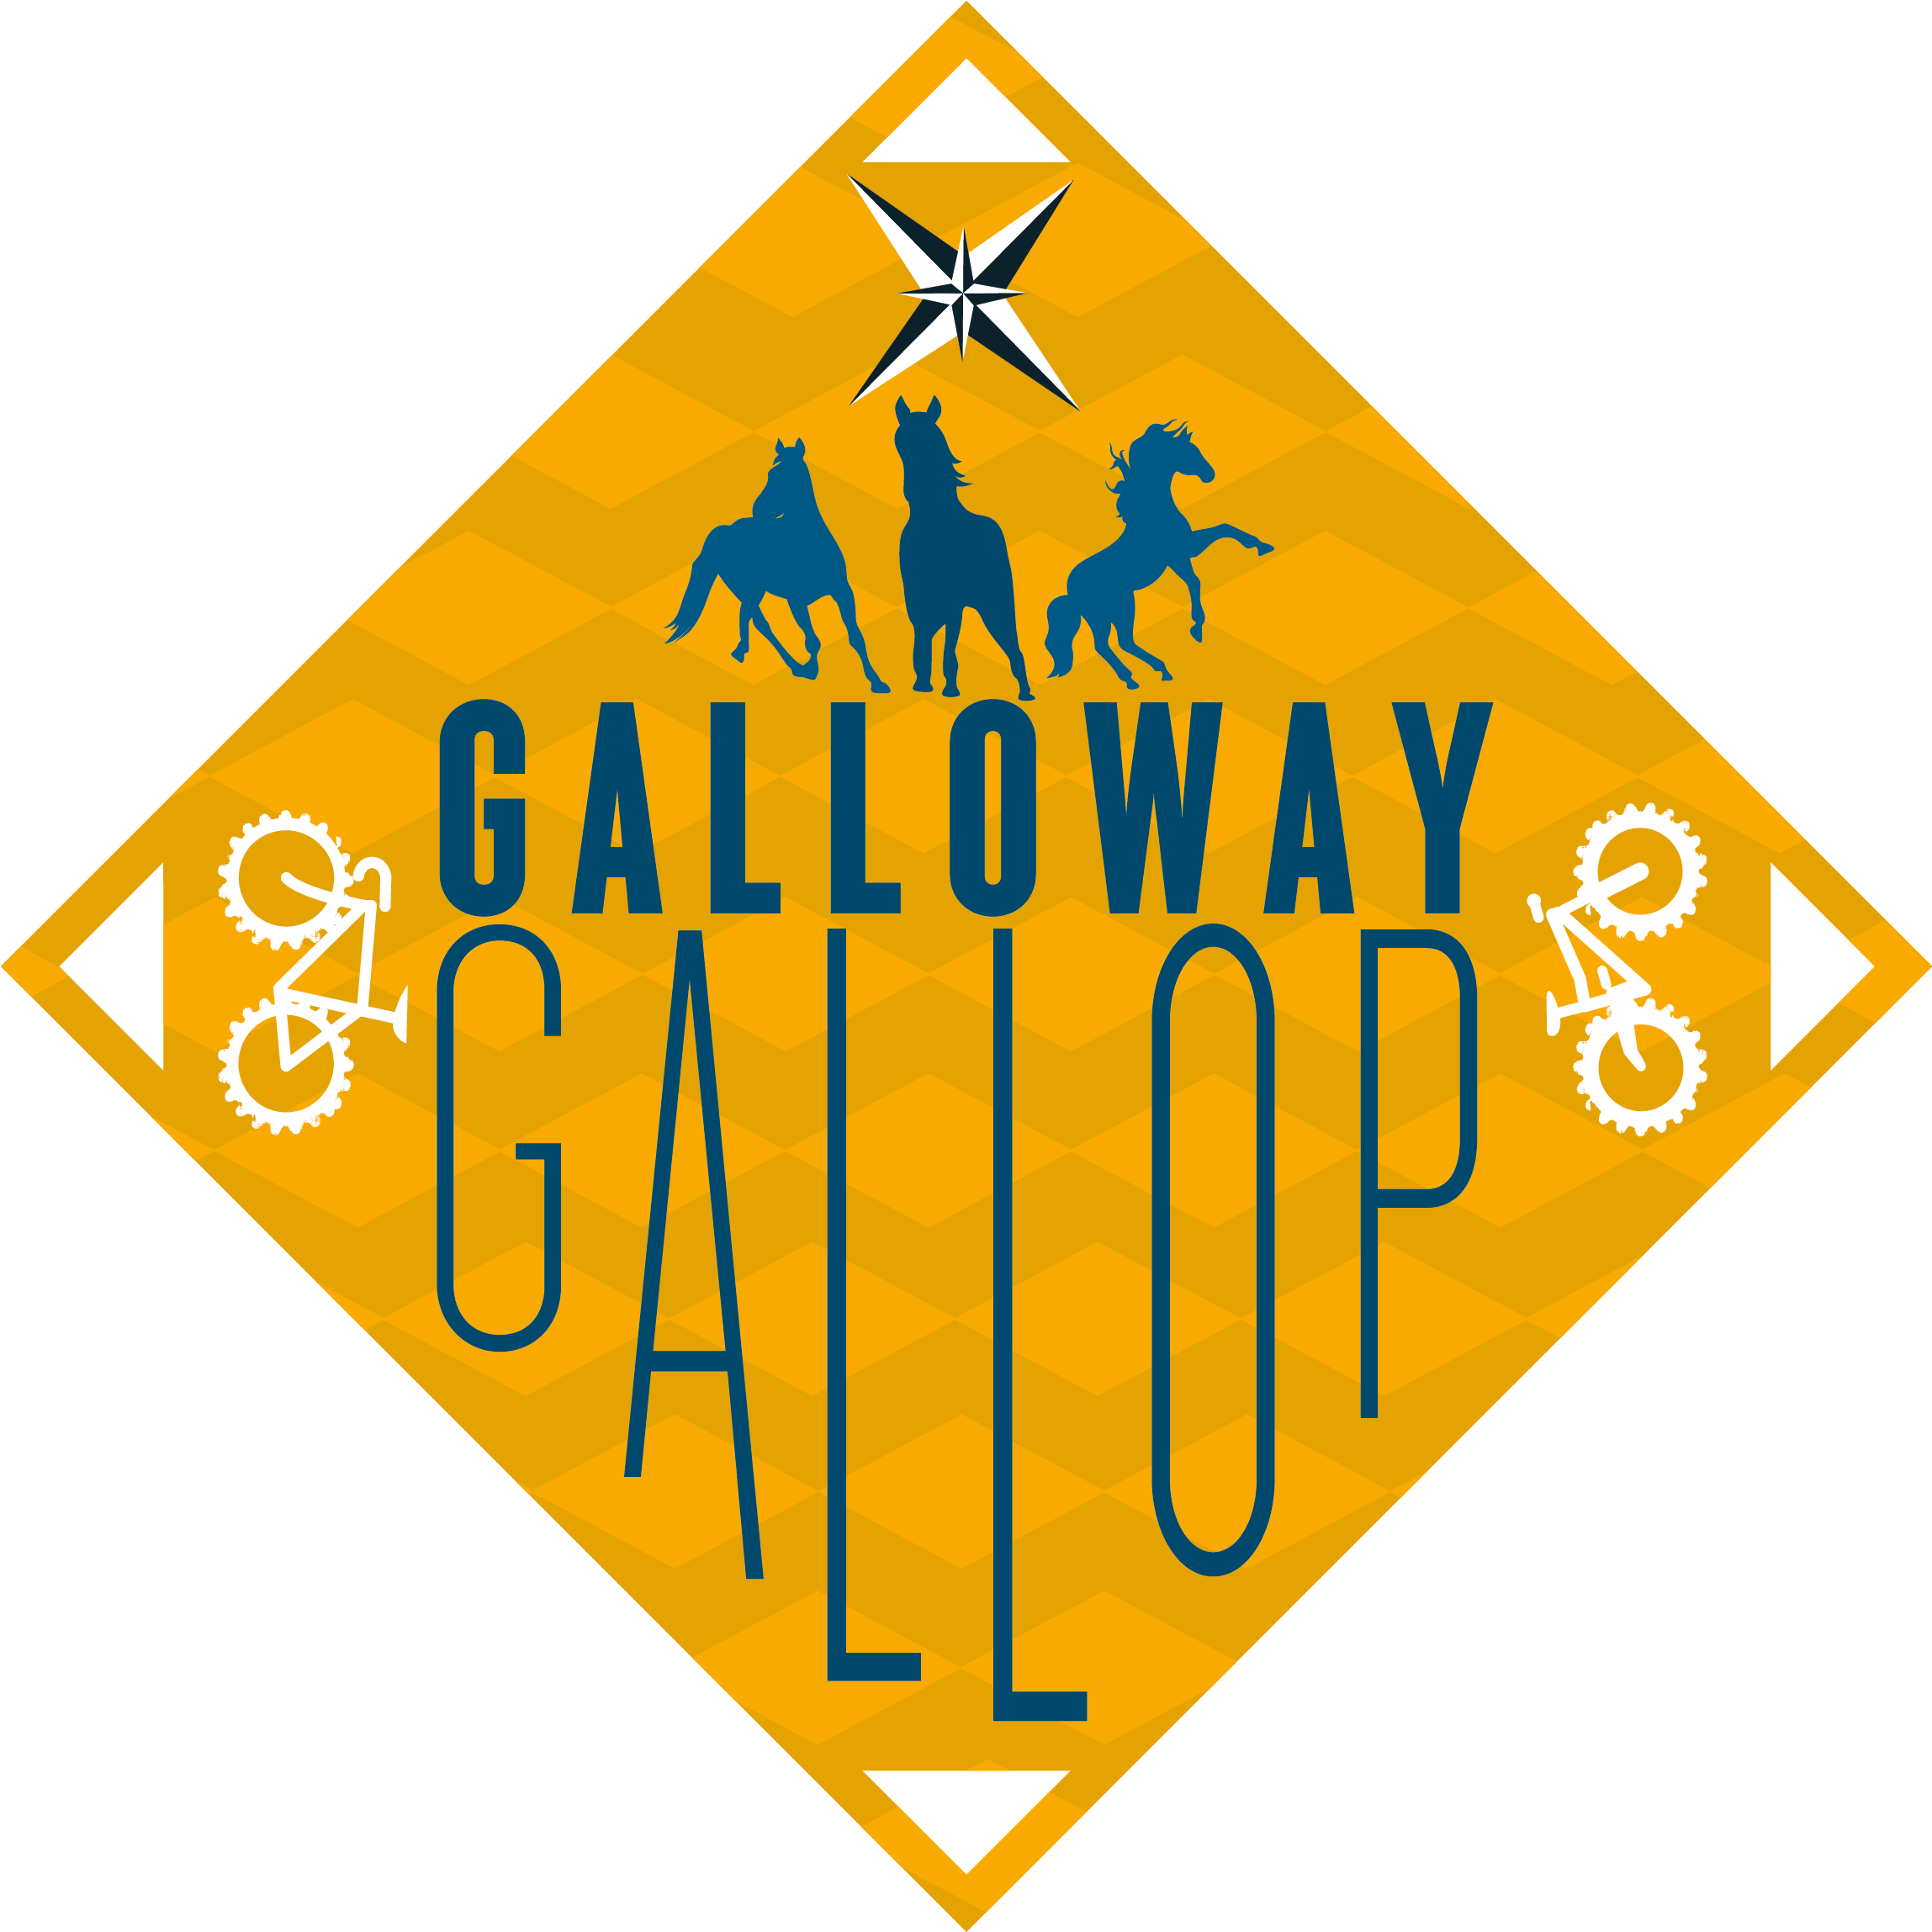 Galloway Gallop Sunday 23 September - Preventing Sexual Assault (2363x2363), Png Download